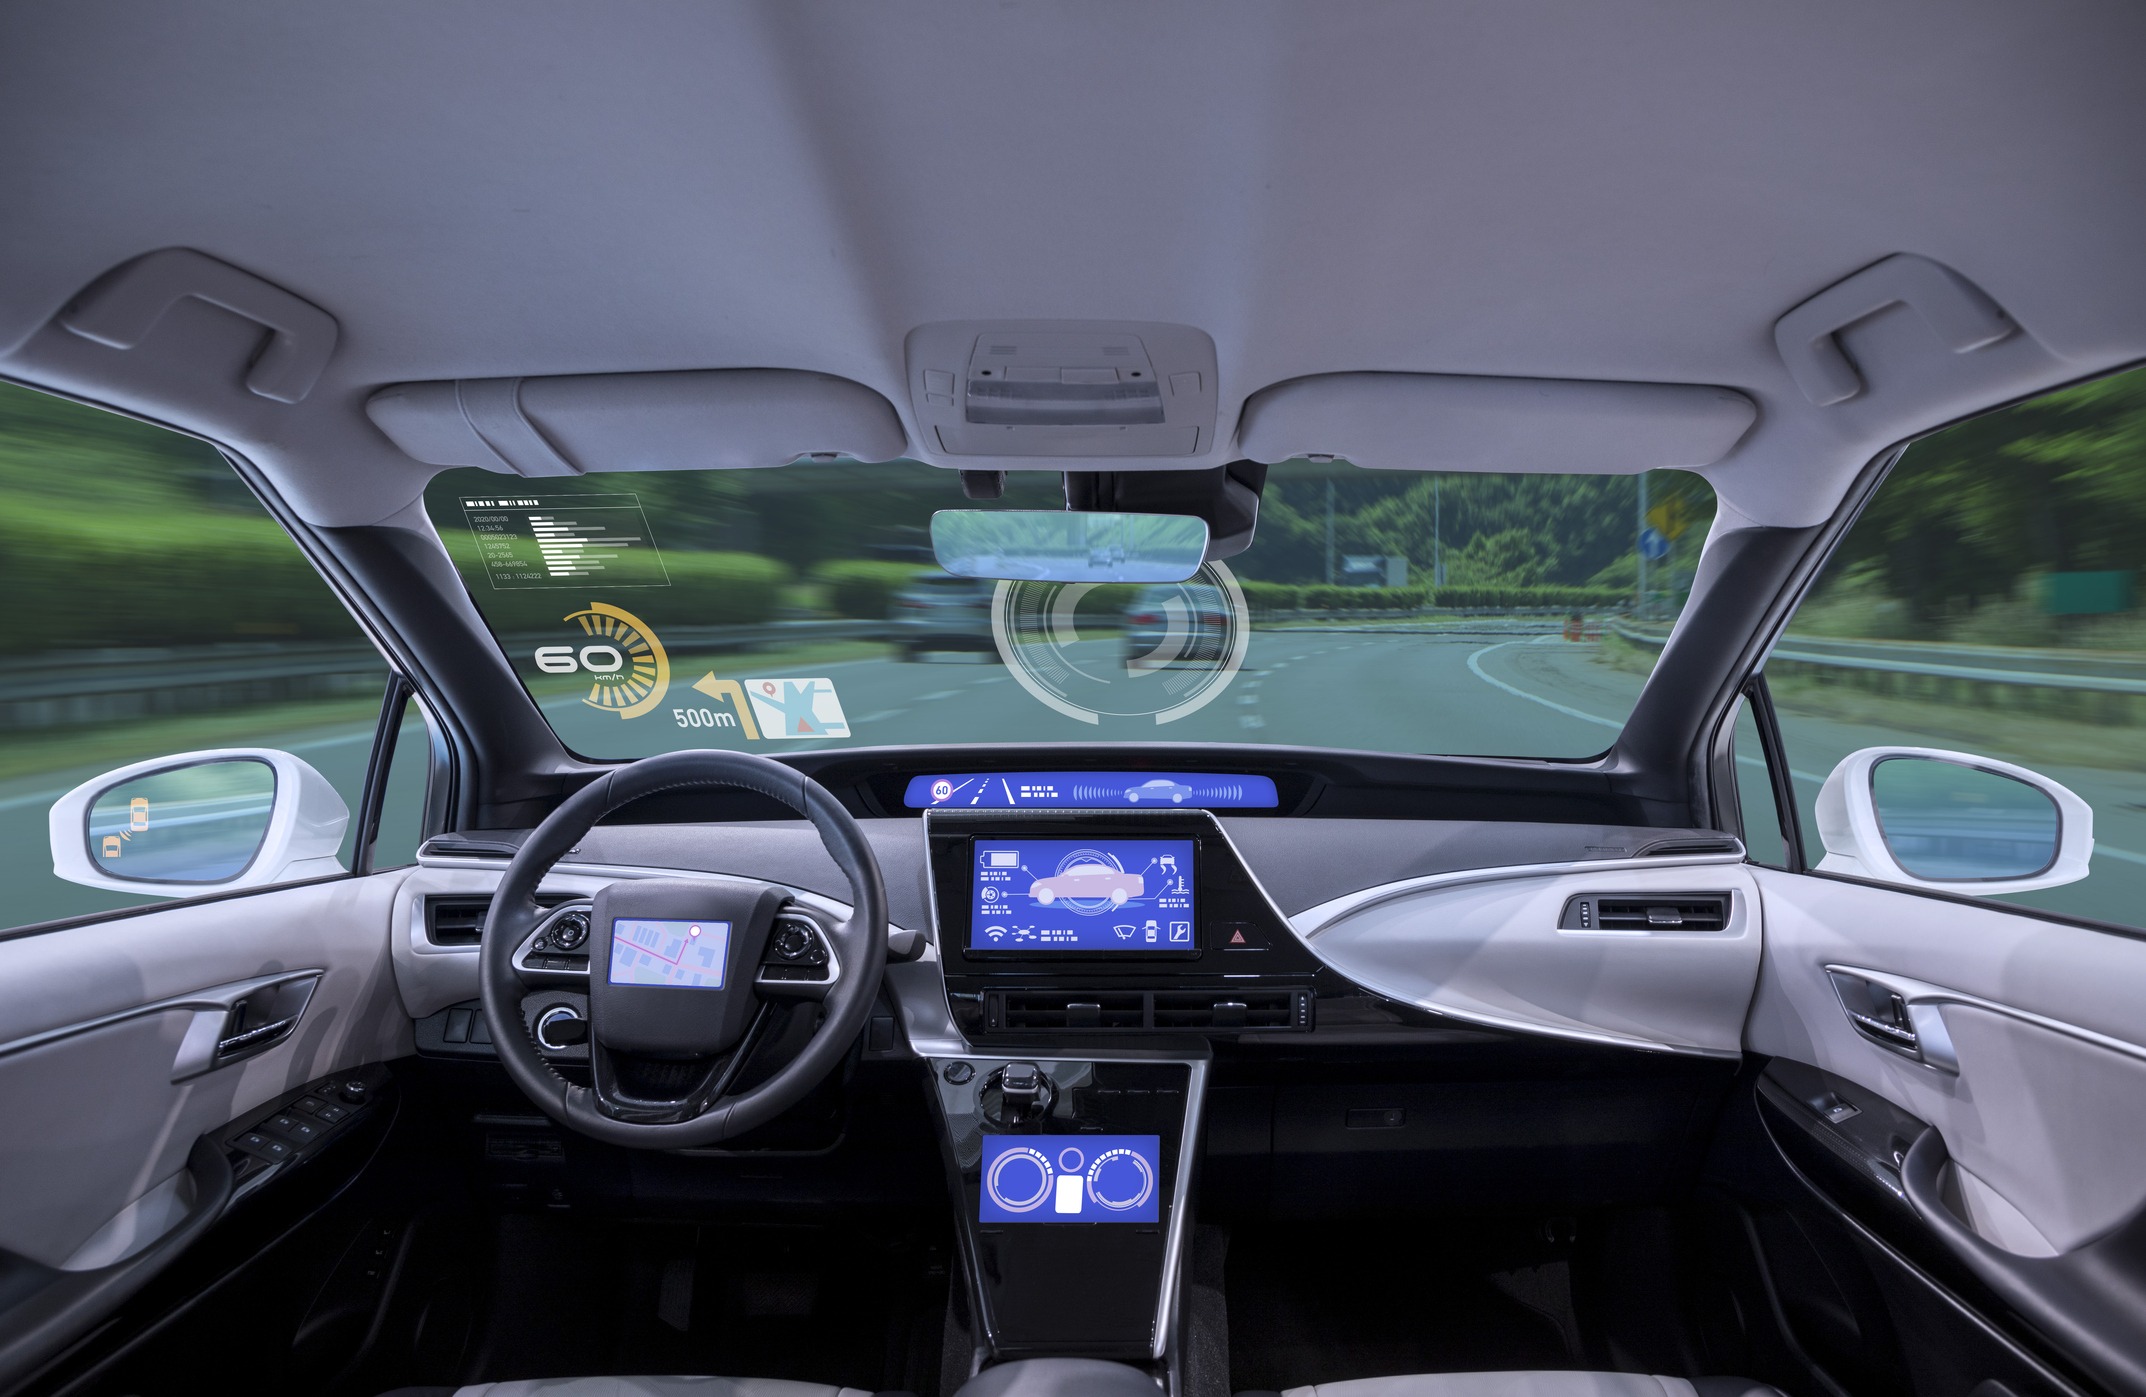 A futuristic car interior infotainment system with a heads up display